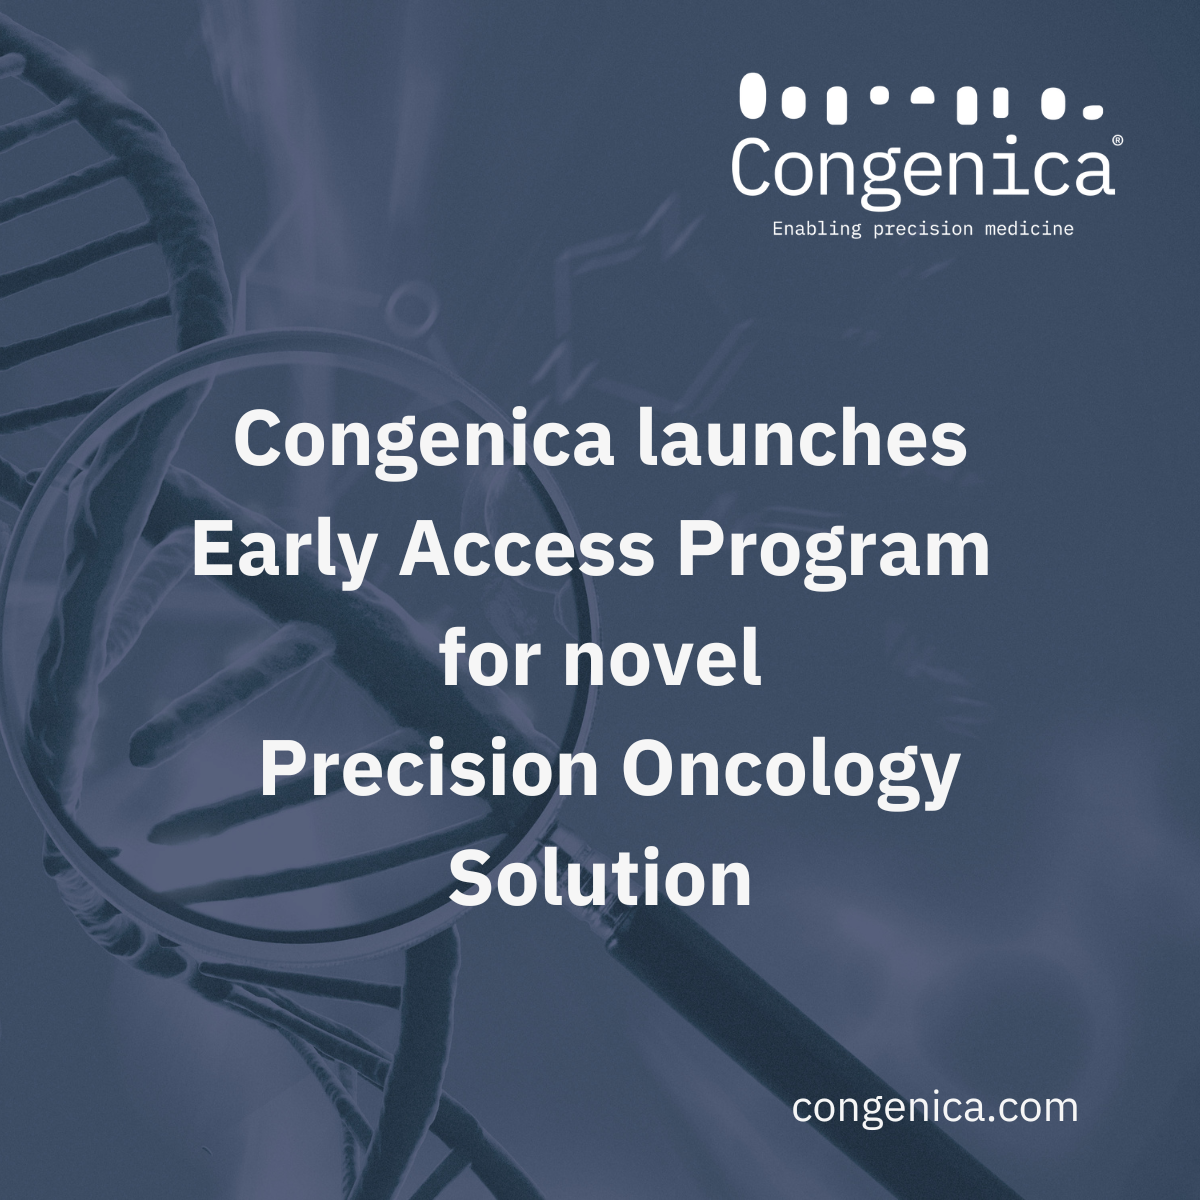 Congenica announces Early Access Program for its novel Precision Oncology Solution